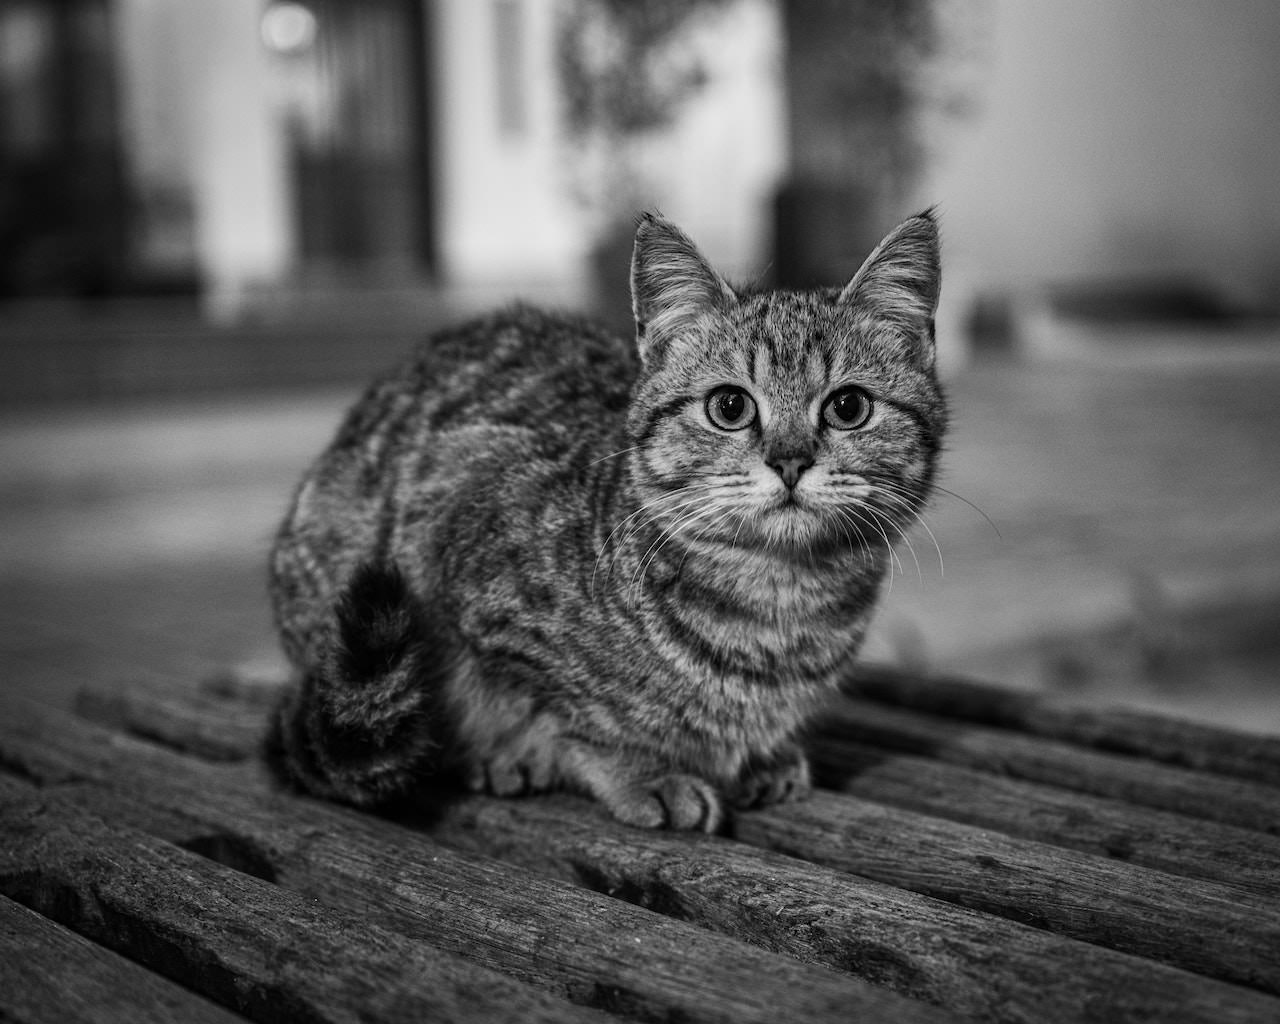 What makes photography art? Black and white image of tabby cat.